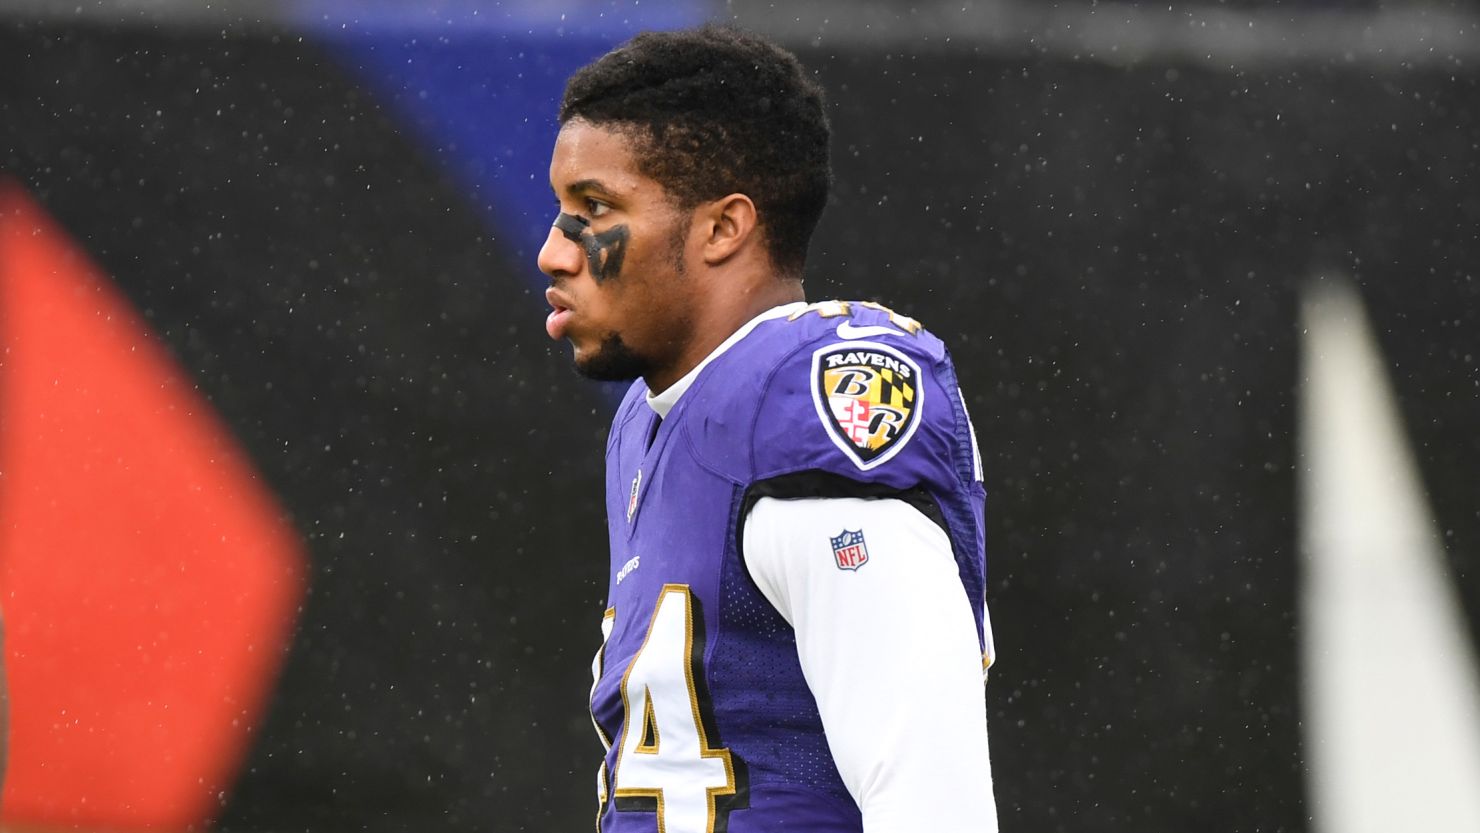 Baltimore Ravens cornerback Marlon Humphrey confirmed that he has been infected with Covid-19.